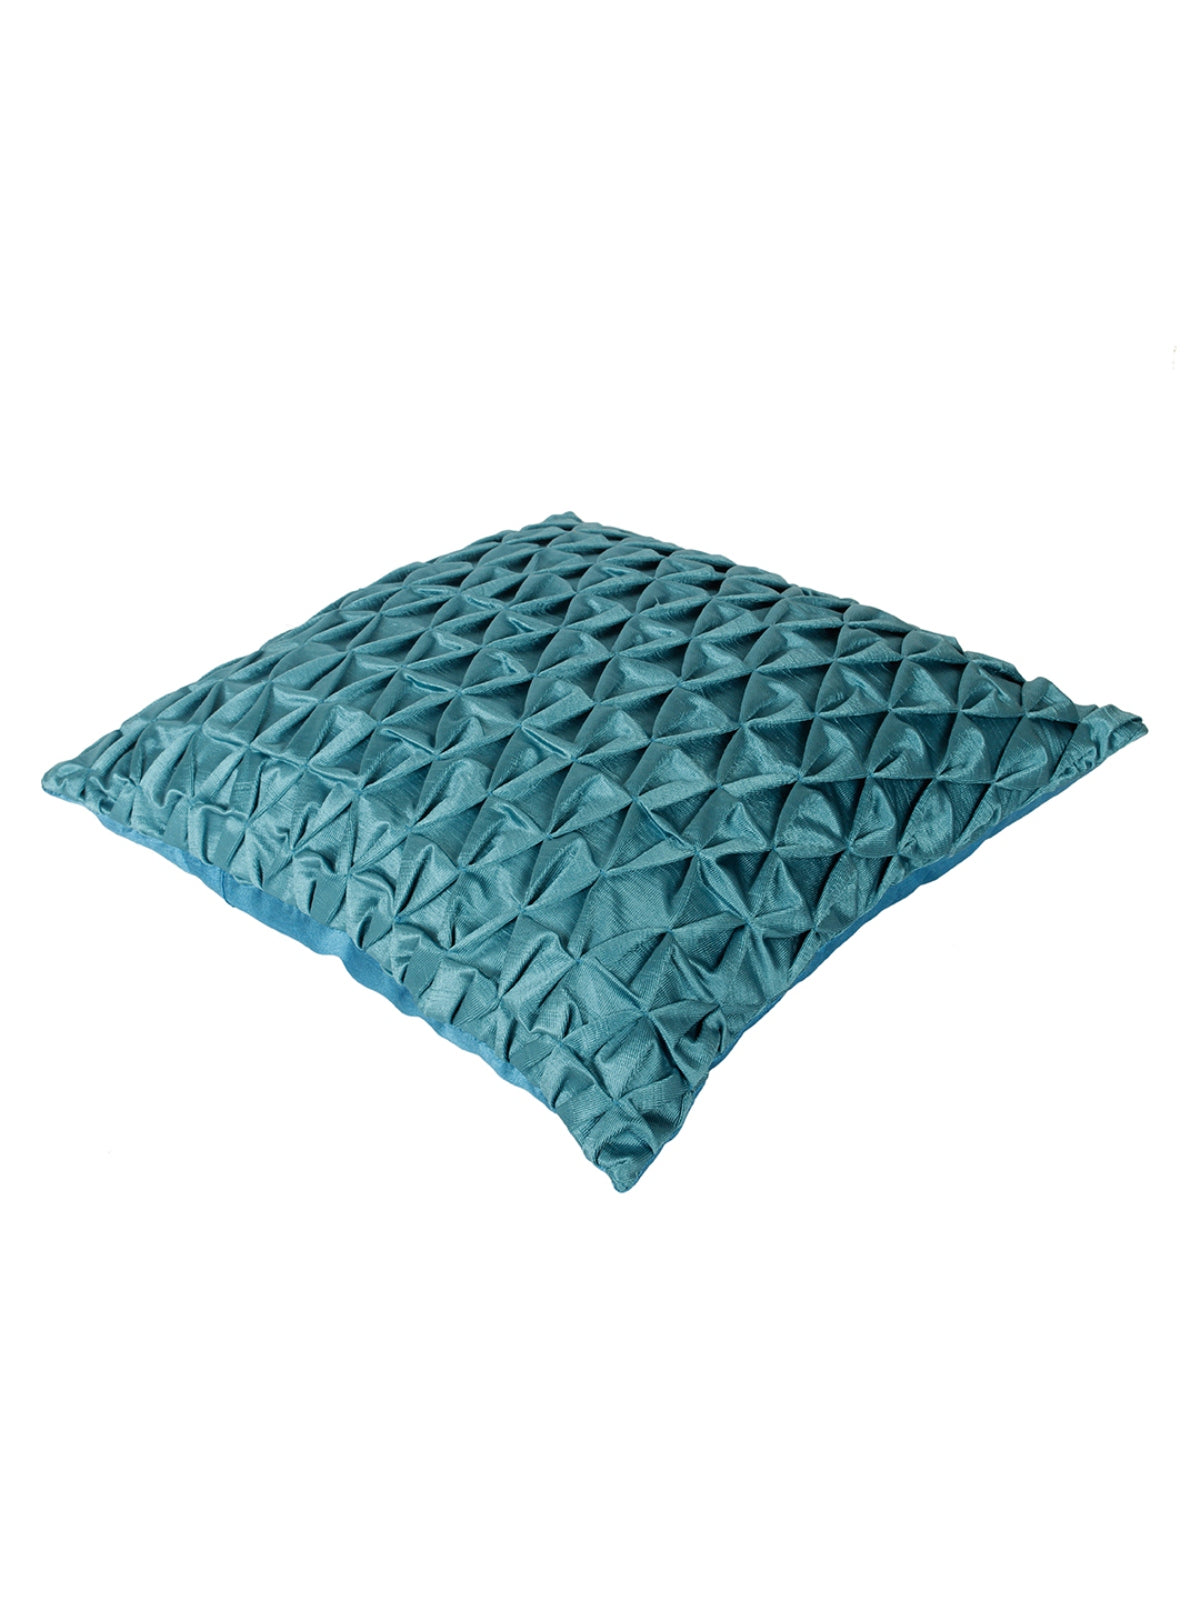 Polyester Fabric Geometric Cushion Cover 16x16 Set of 3 - Turquoise